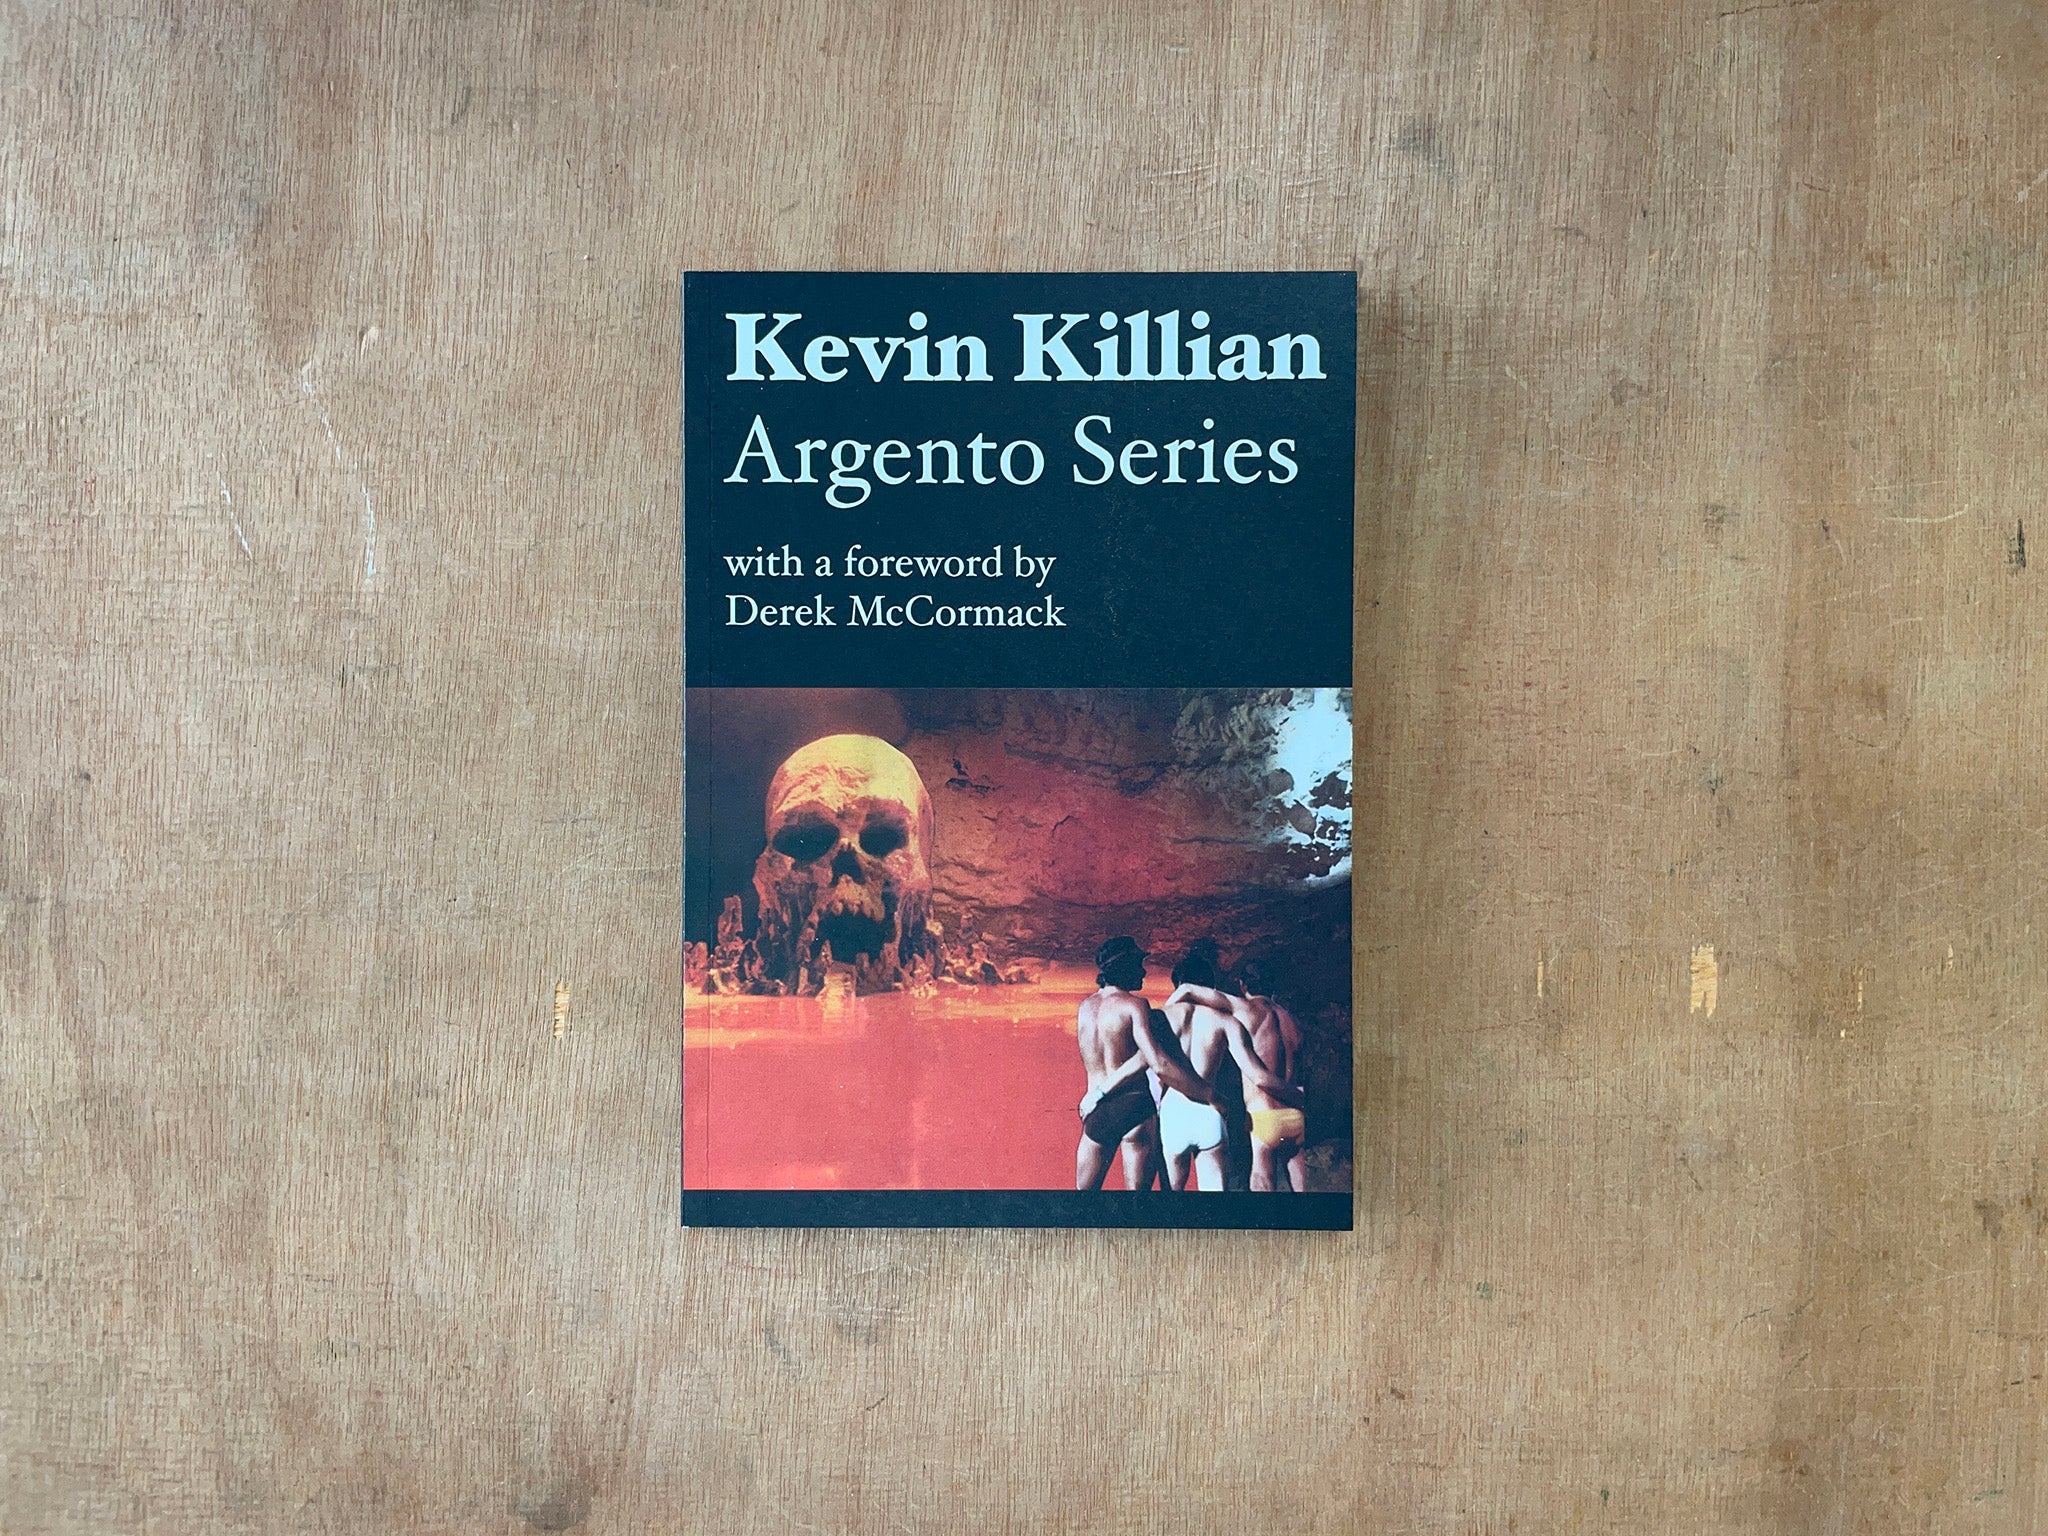 ARGENTO SERIES by Kevin Killian